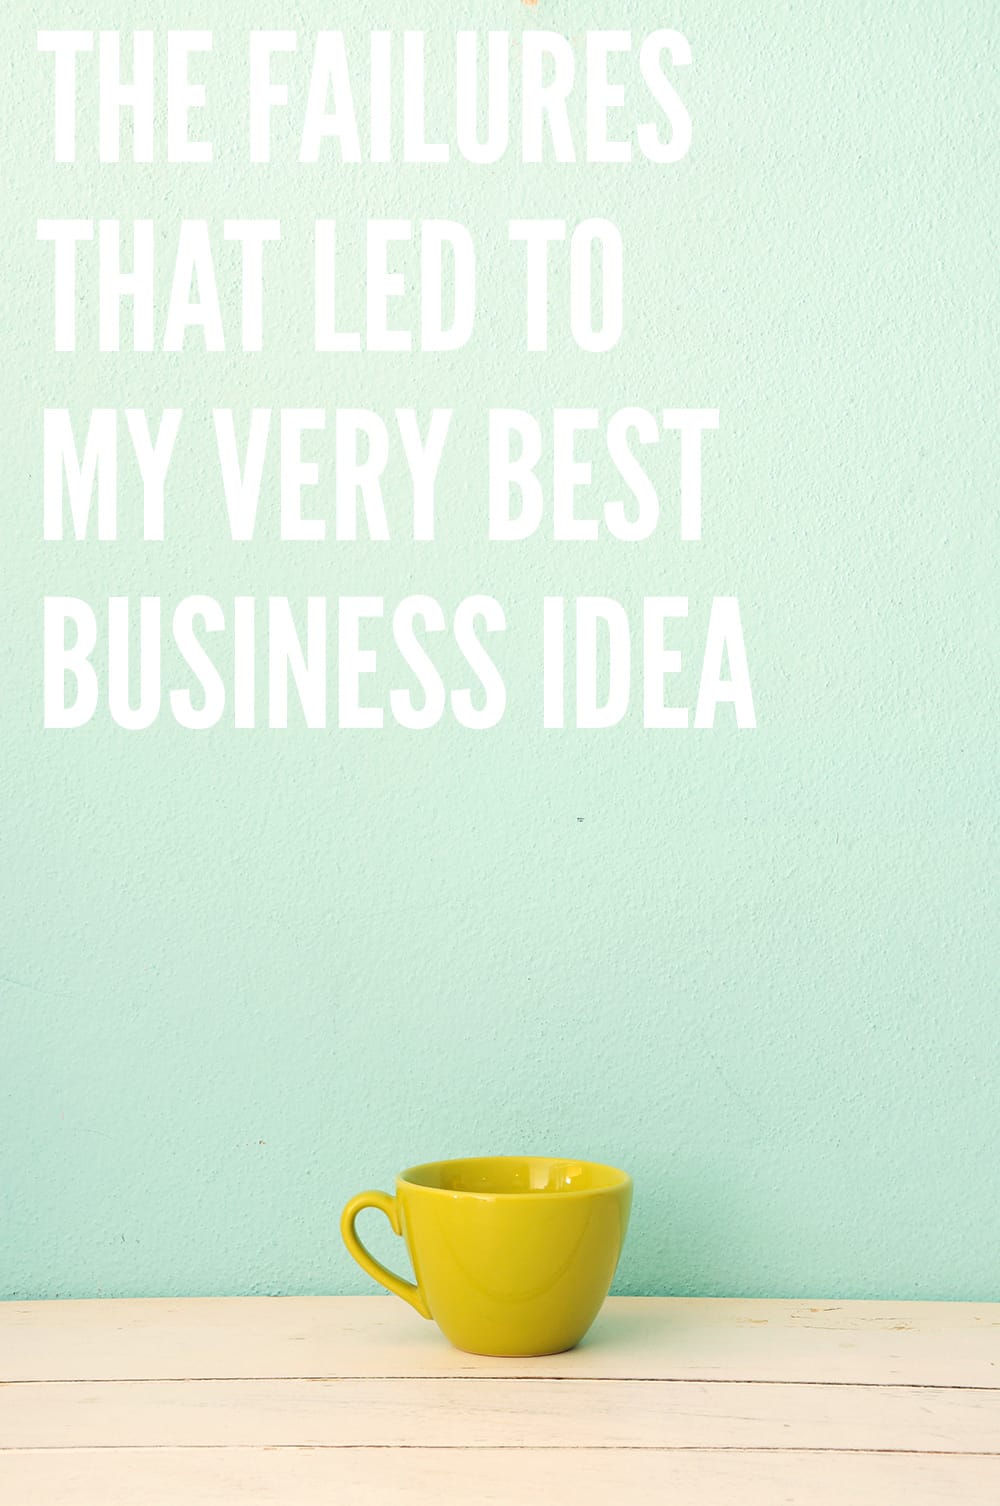 The Failures That Led to My Best Business Idea